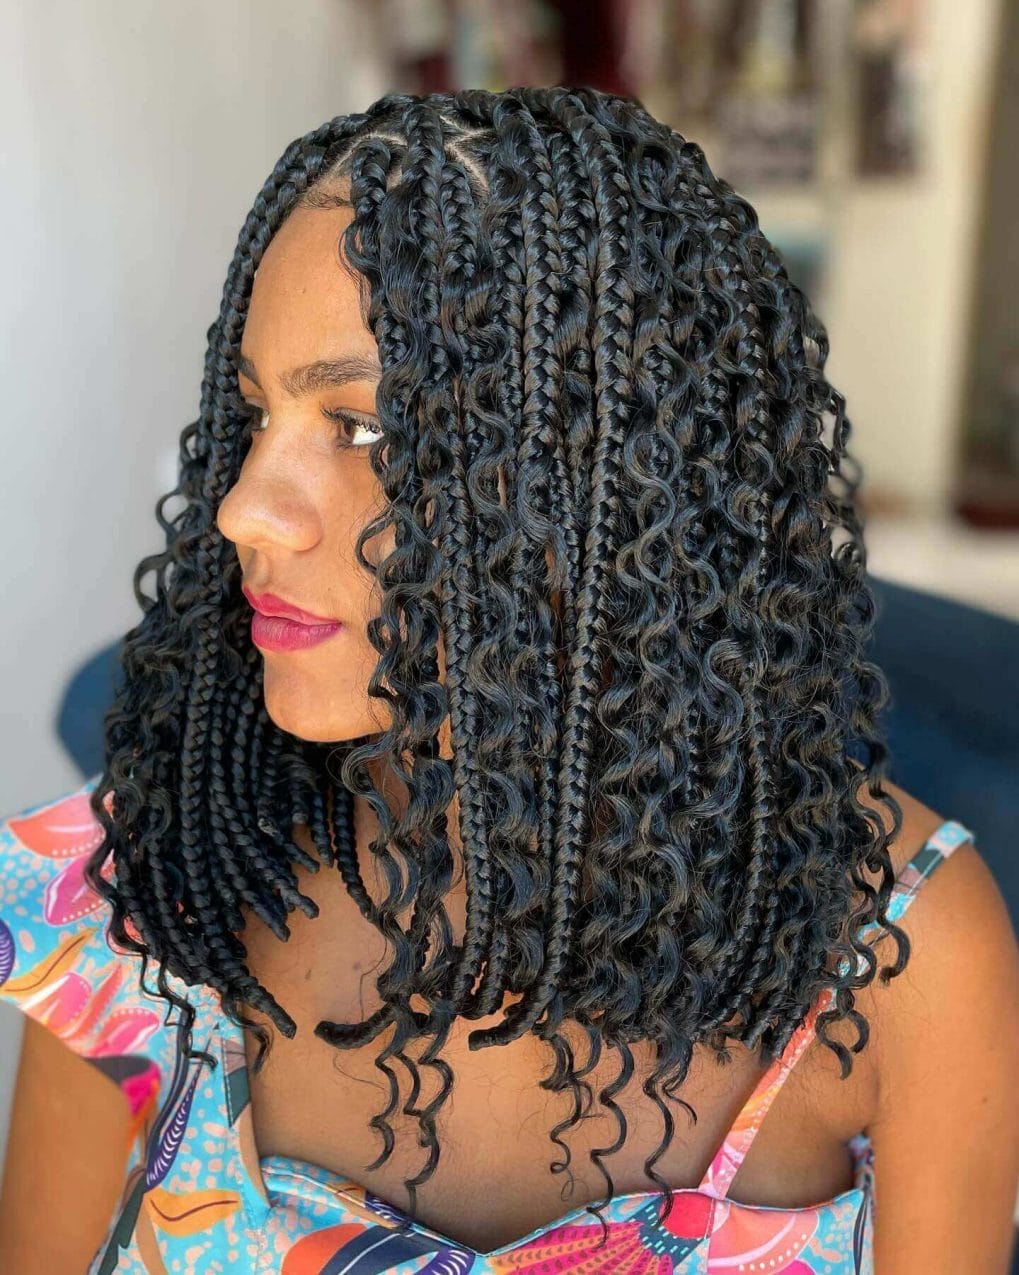 Jet-black tiny curls meet neat cornrows for a playful and practical style